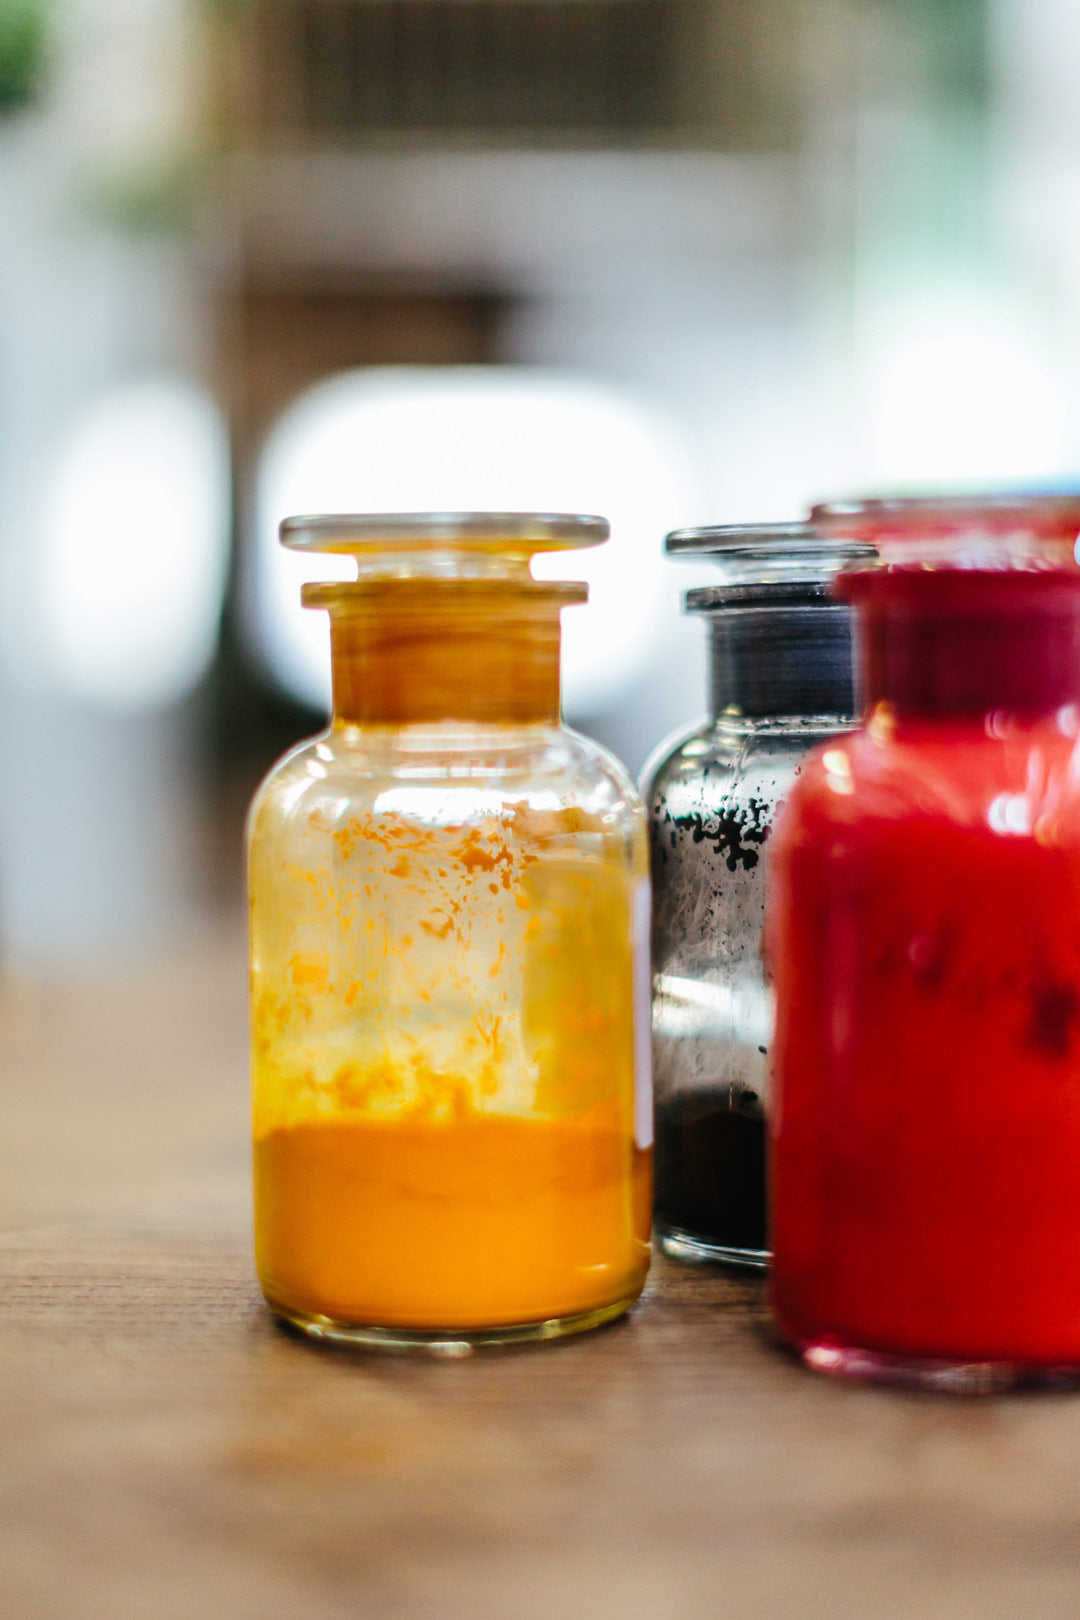 Yellow and red powdered dye inside two glass jars